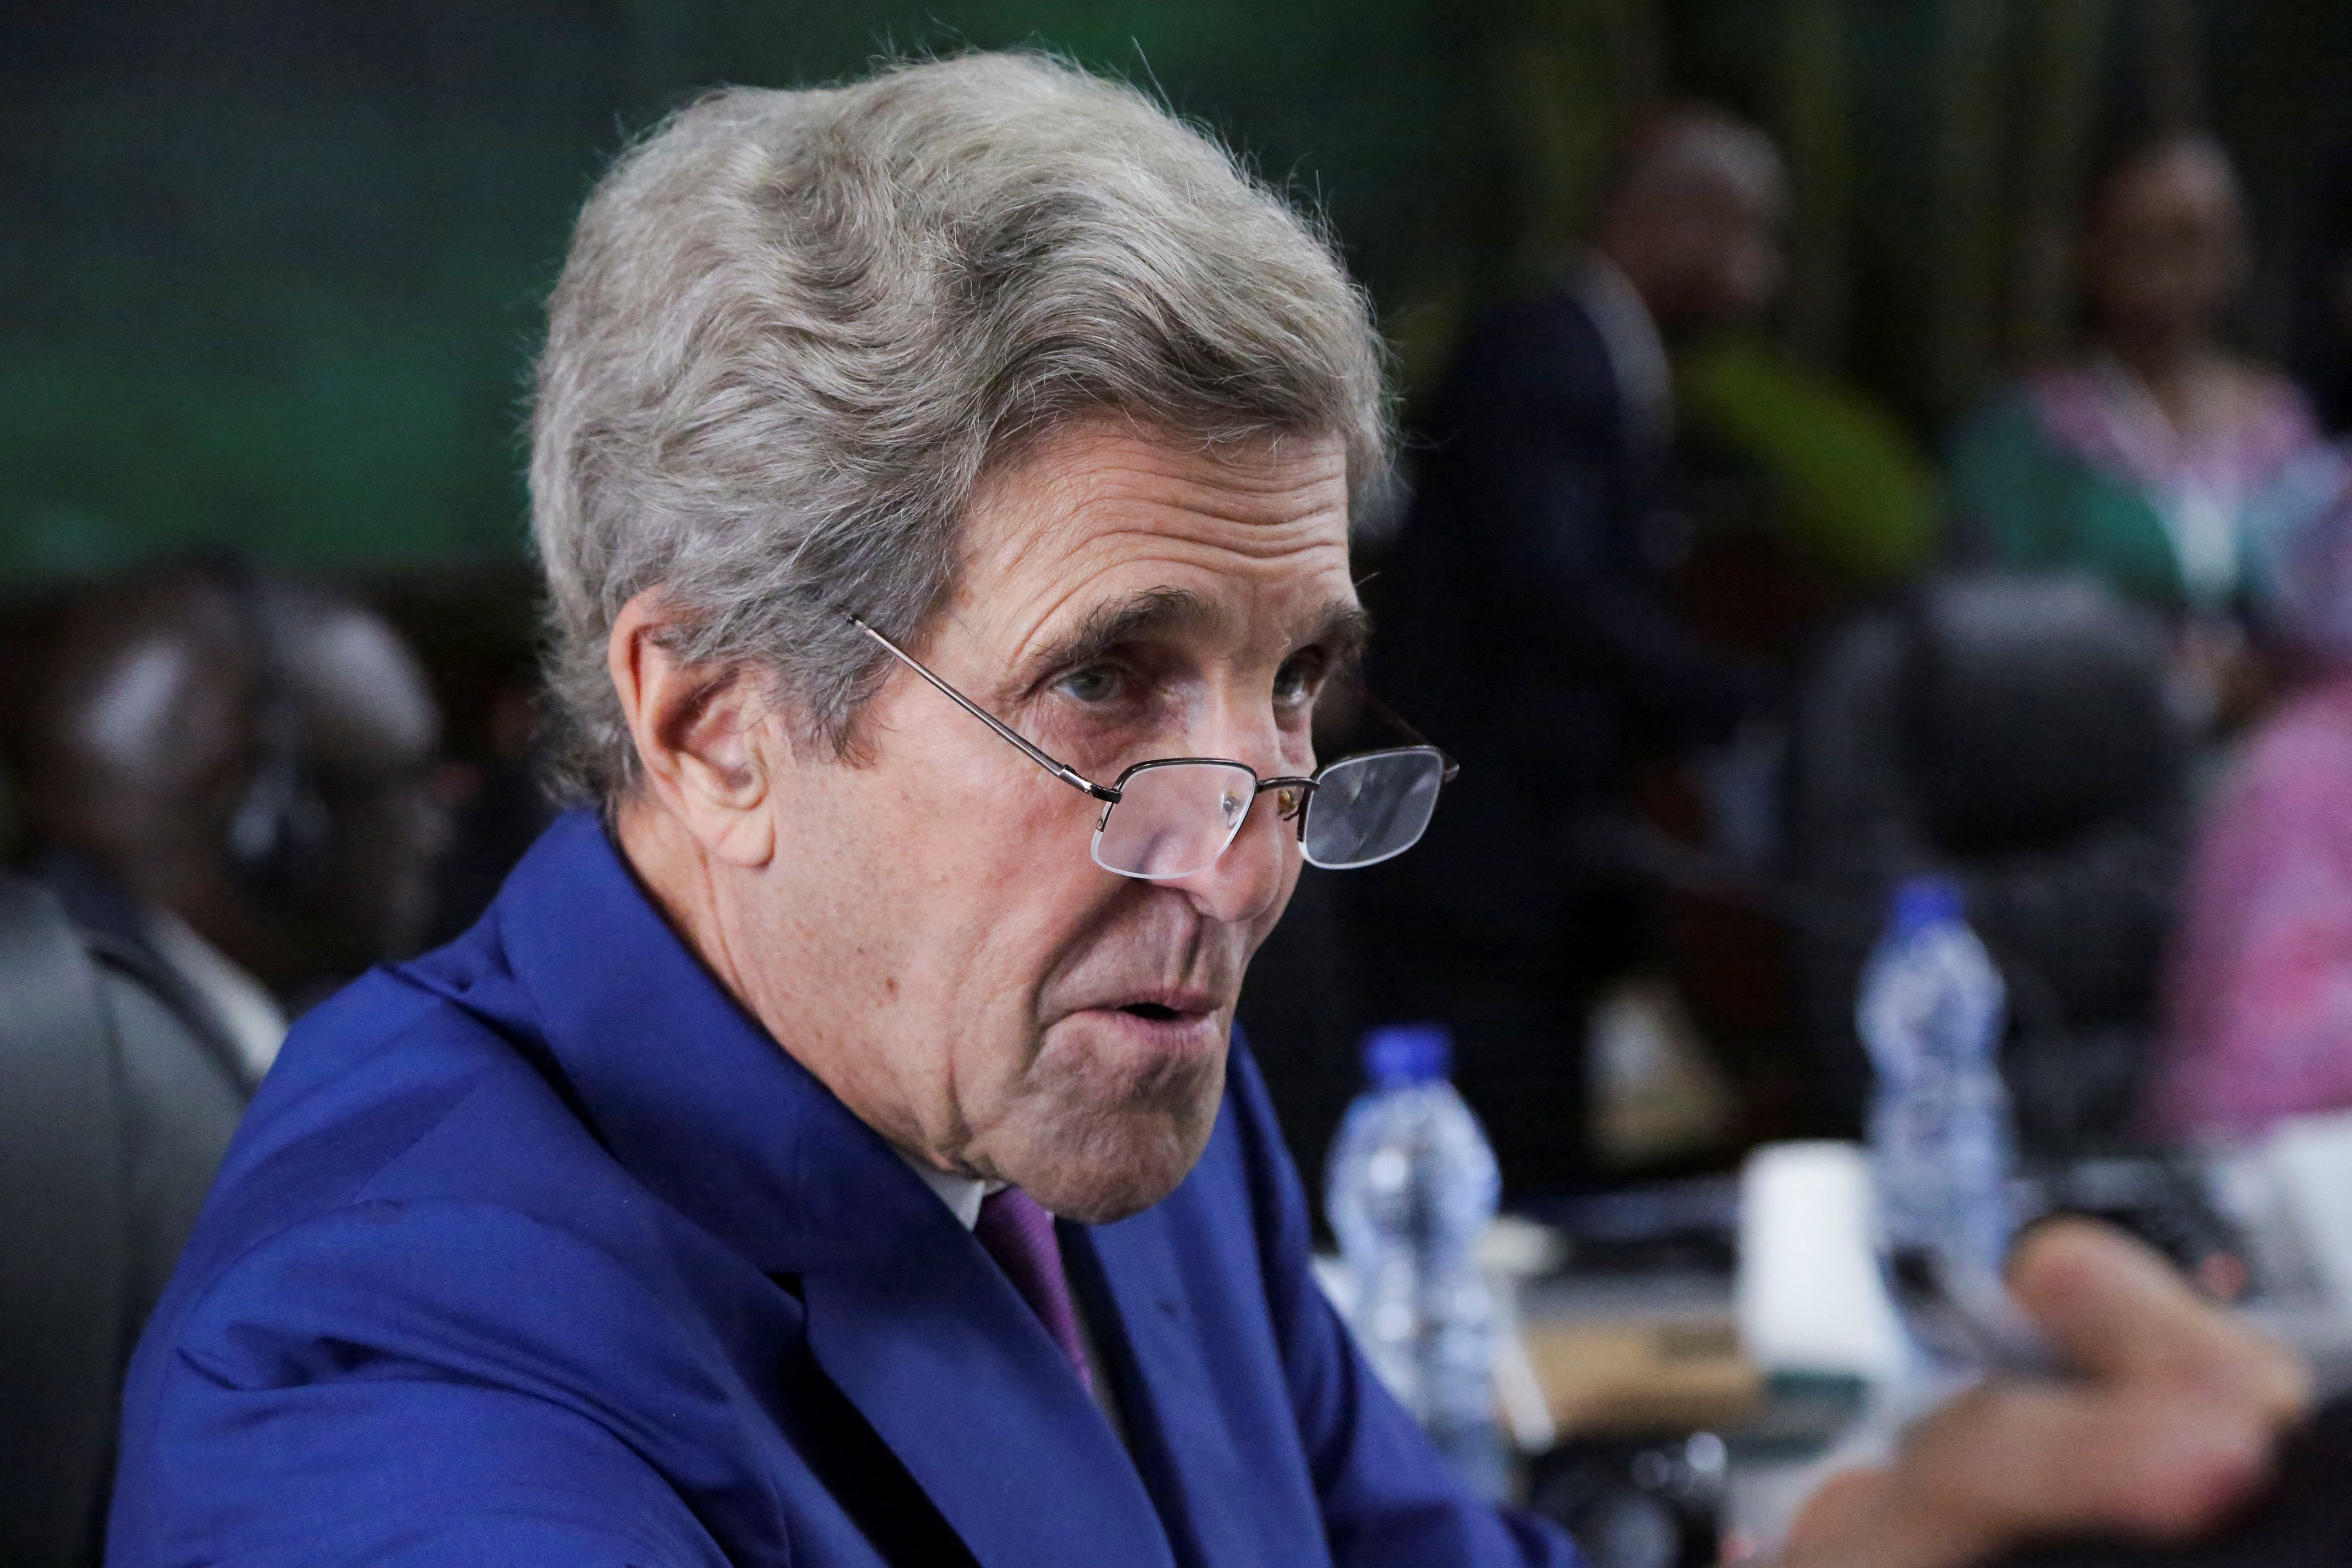 U.S. Special Presidential Envoy for Climate John Kerry attends a meeting ahead of COP27 climate summit in Kinshasa